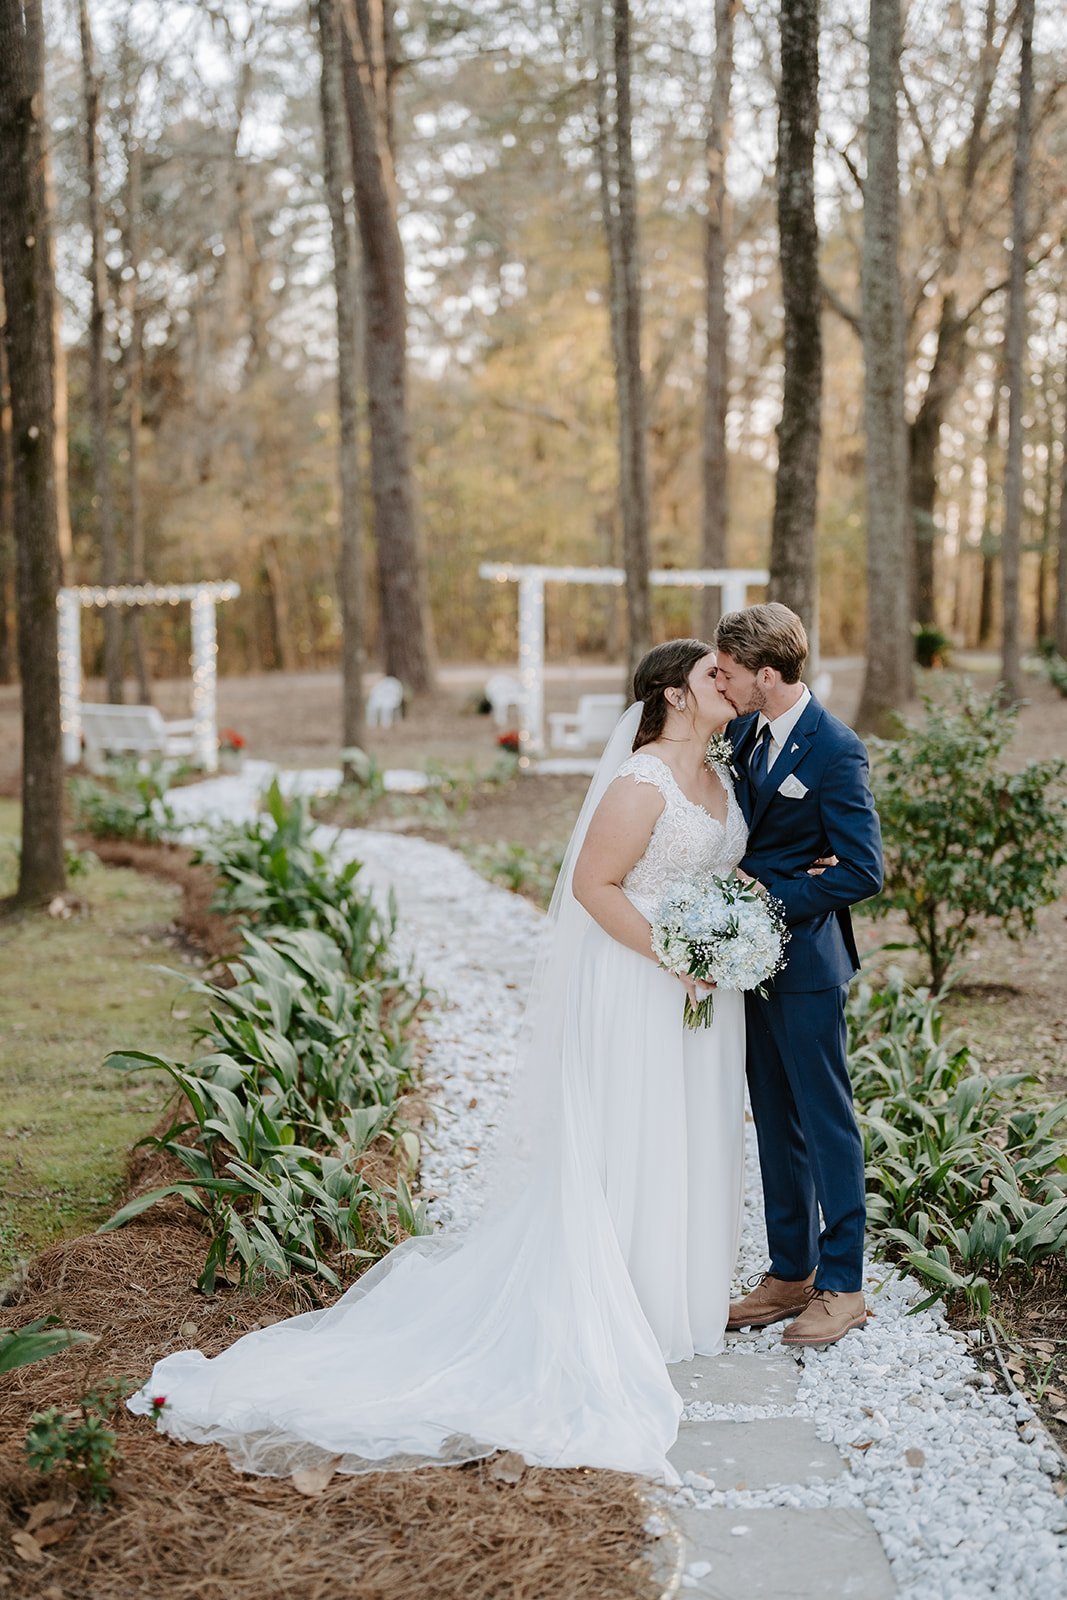 real-savanna-bride-in-the-june-wedding-gown-by-maggie-sottero-purchased-from-savannah-bridal-shop-ivory-and-beau-savannah-bridal-boutique-savannah-wedding-gowns-savannah-wedding-dresses-7.jpg